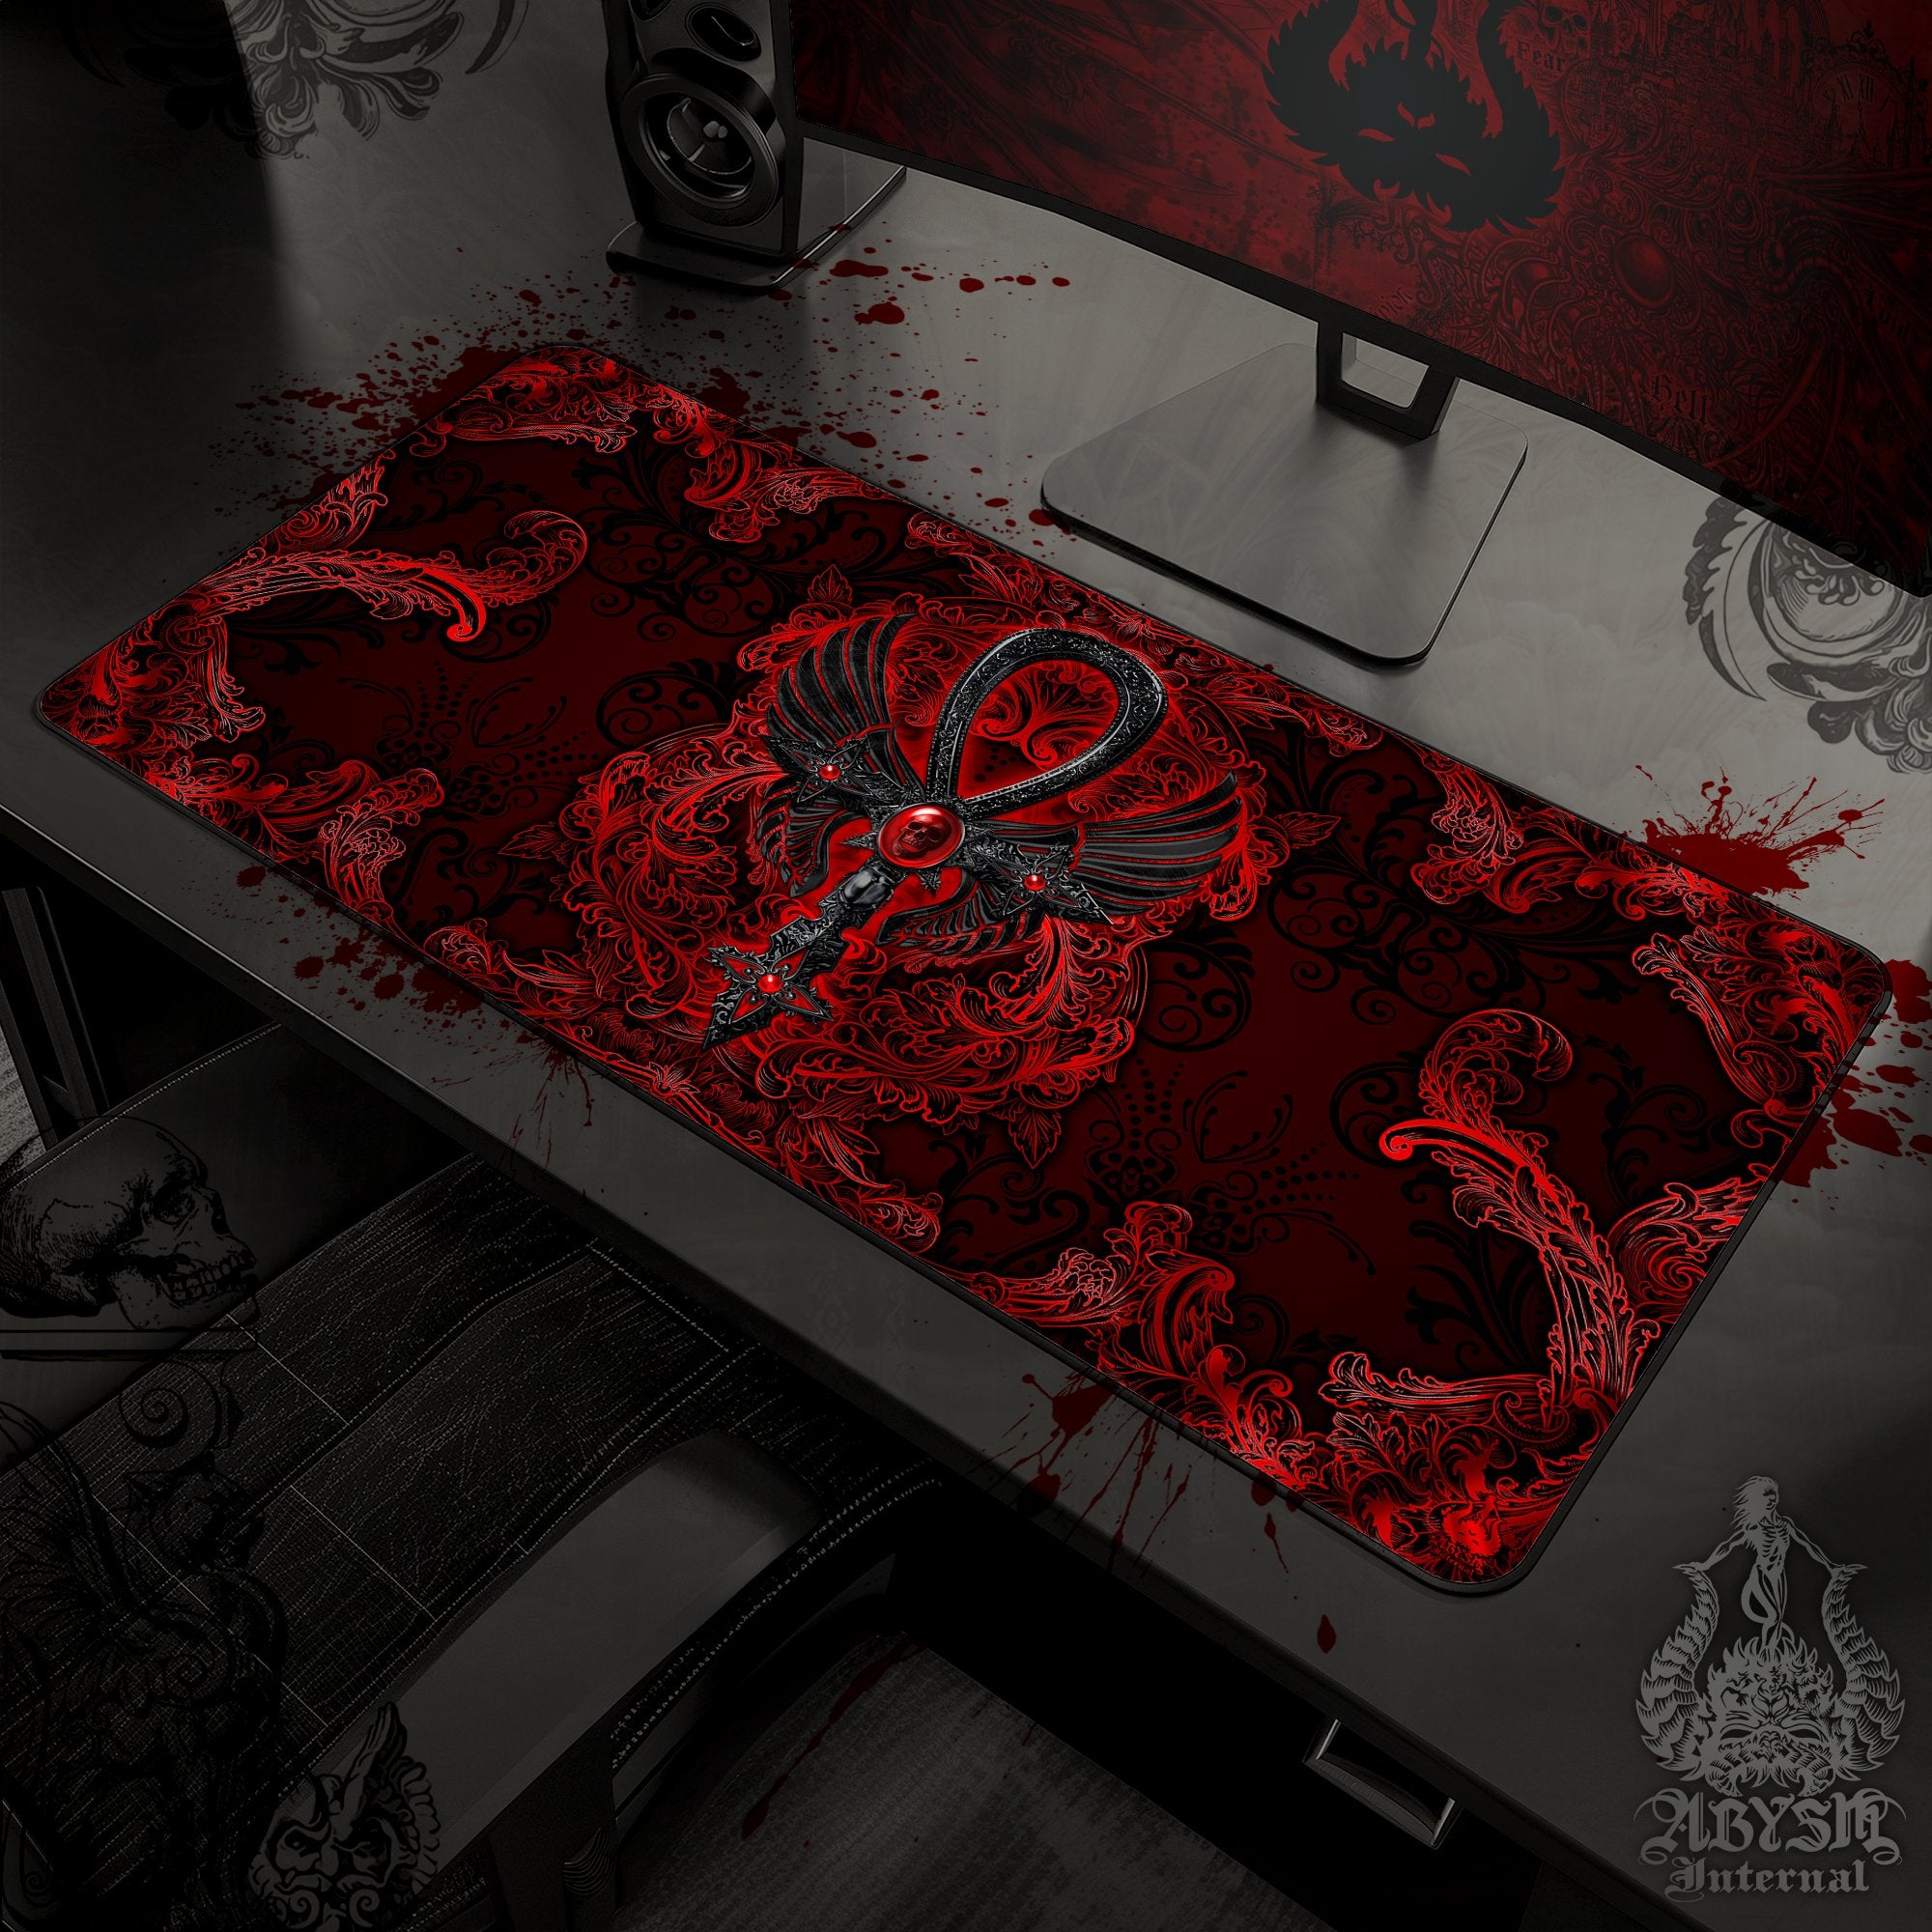 Bloody Goth Mouse Pad, Ankh Gaming Desk Mat, Red and Black Cross Table Protector Cover, Skull Workpad, Dark Art Print - 3 Colors - Abysm Internal